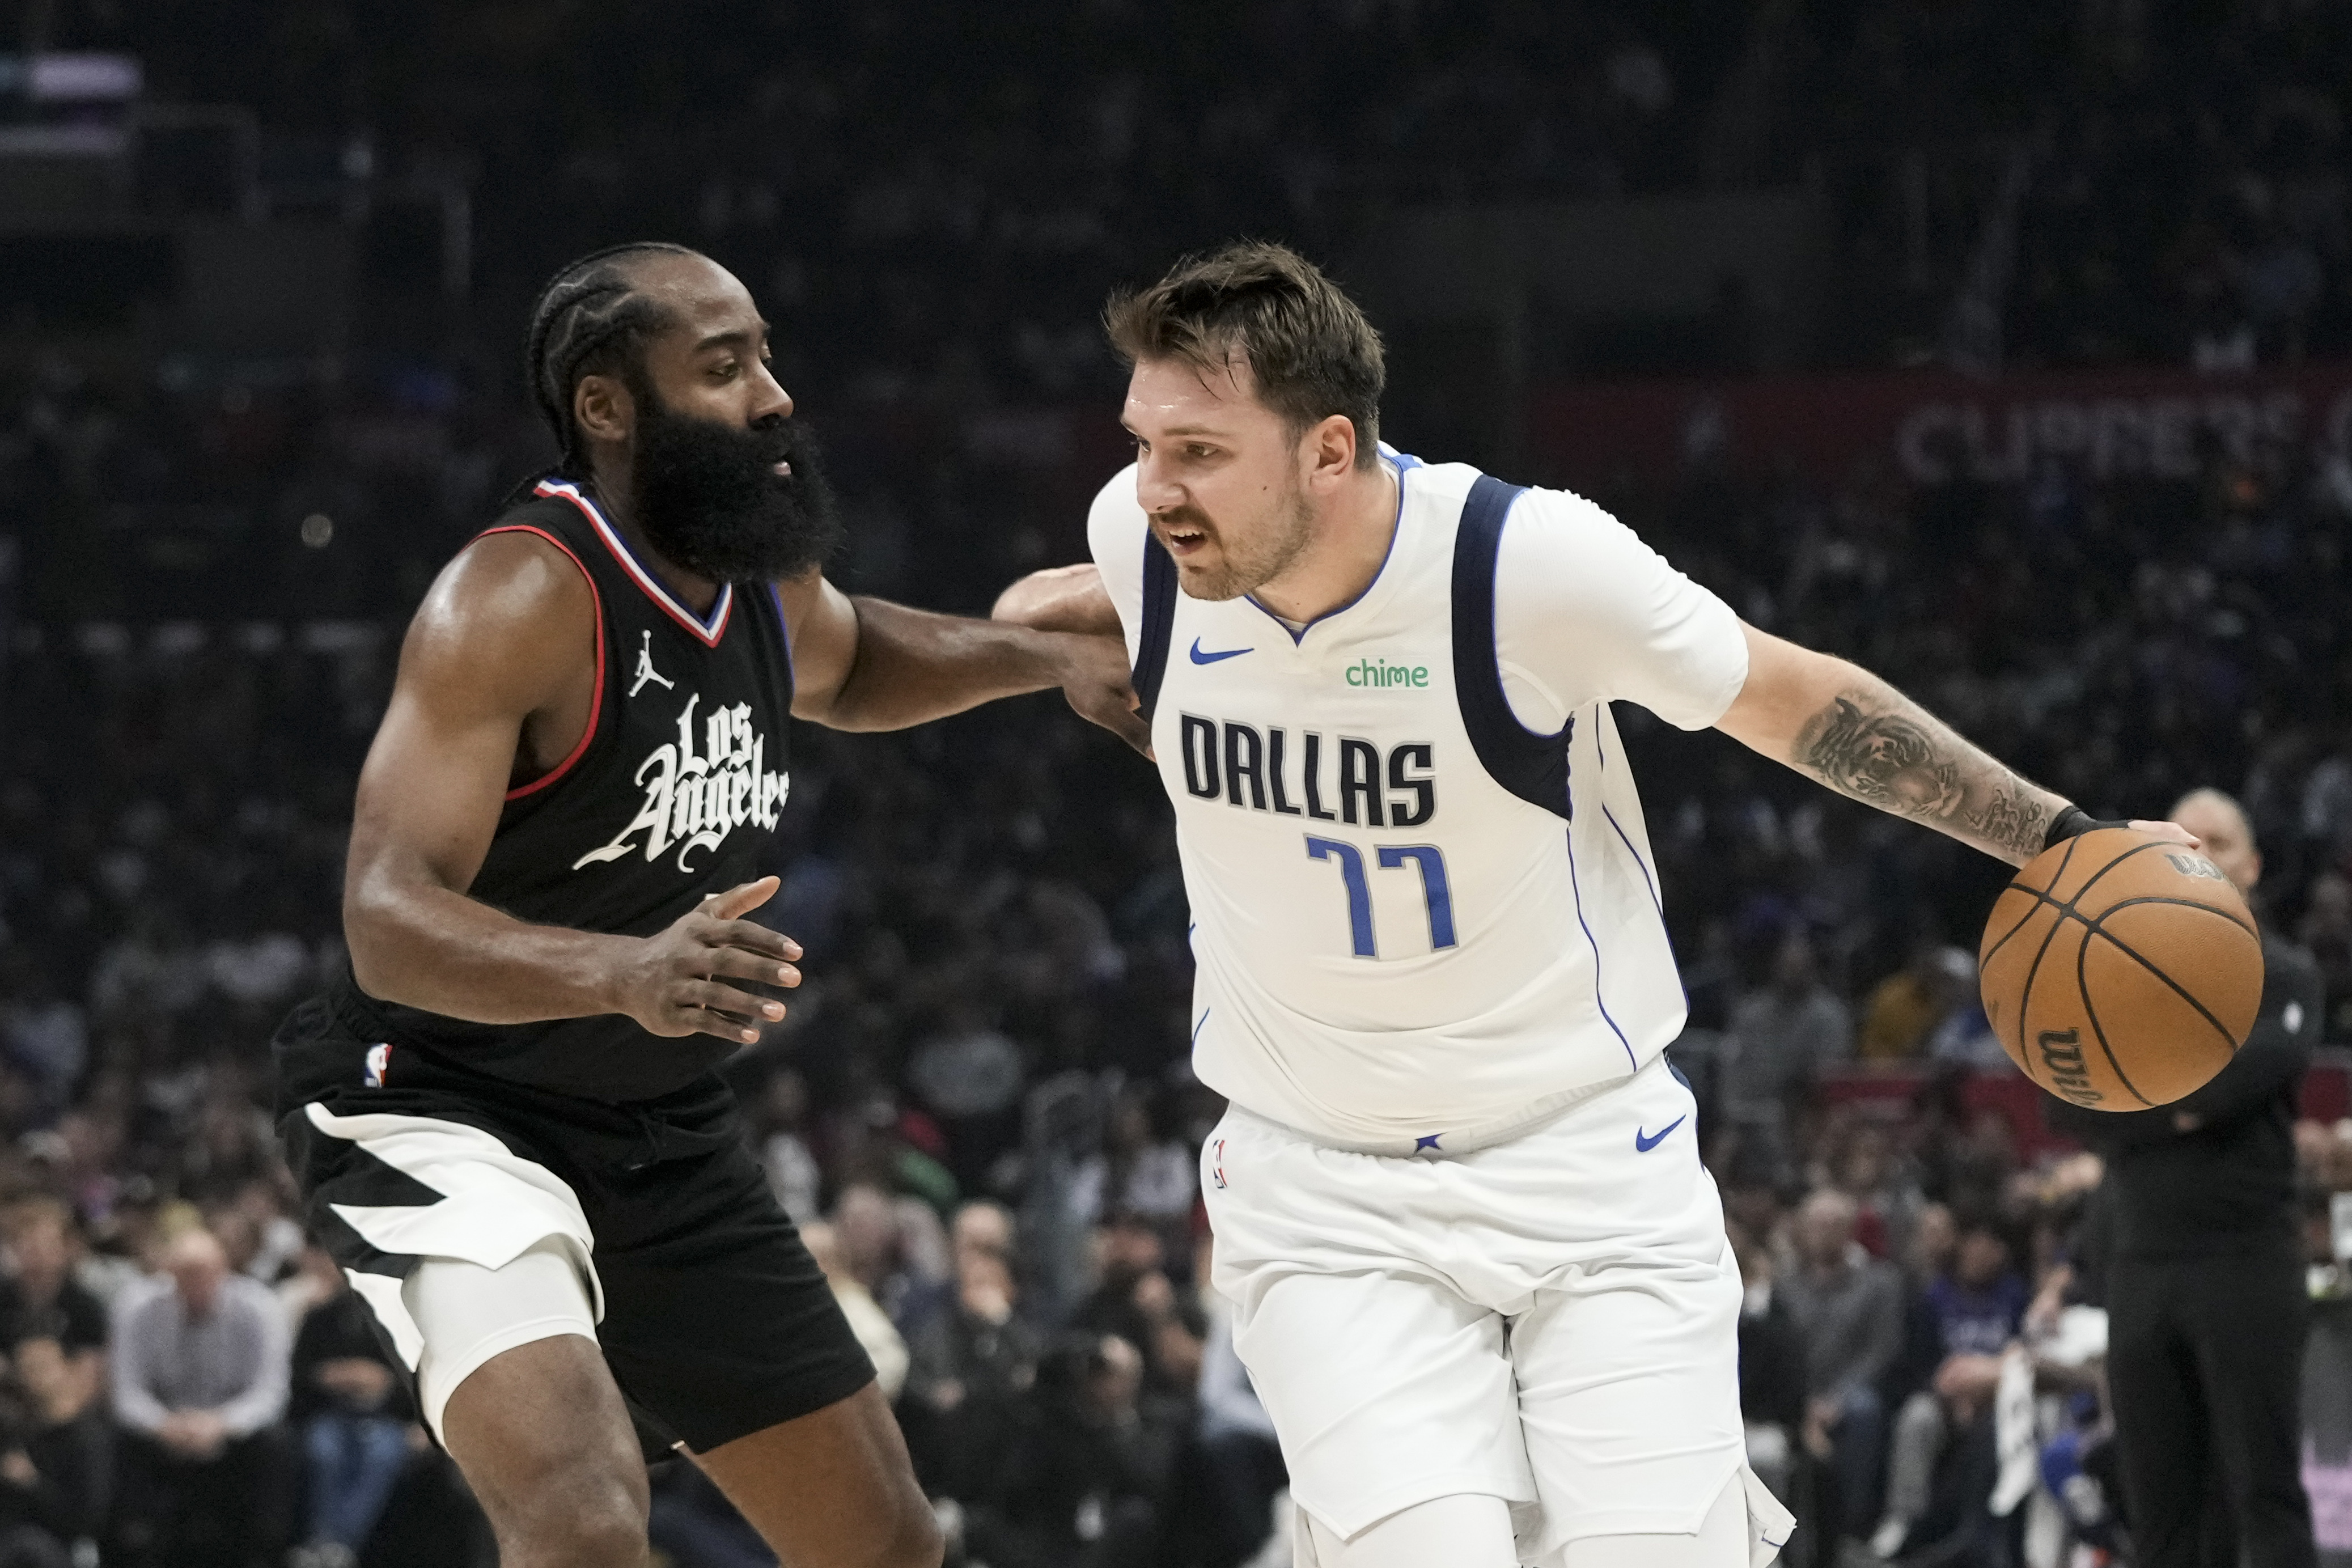 Los Angeles Clippers' James Harden, left, pressures Dallas Mavericks' Luka Doncic during the first half of an NBA basketball game Saturday, Nov. 25, 2023, in Los Angeles. (AP Photo/Jae C. Hong)